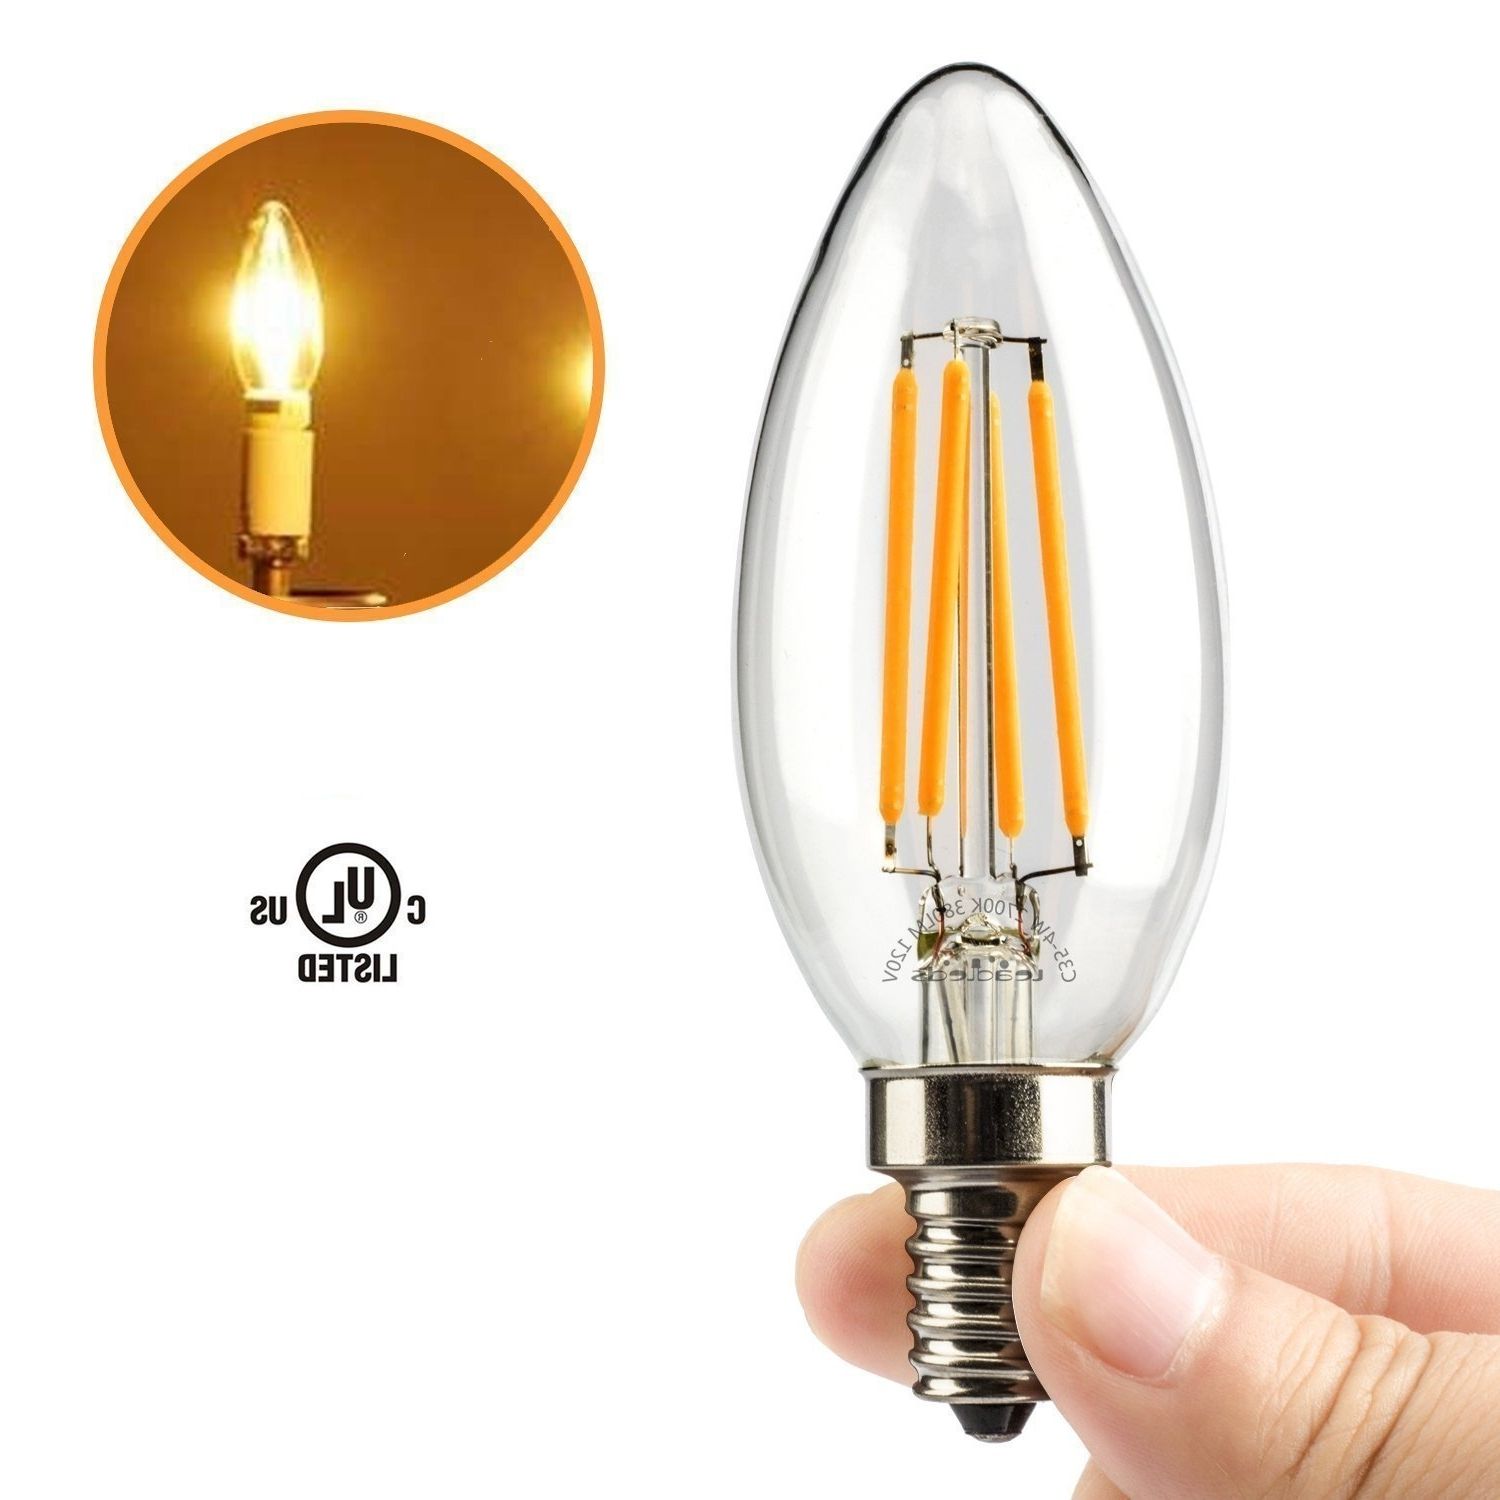 Amazon: Leadleds 4w Candelabra Led Bulb 40 Watt Equivalent 2700k With Regard To 2018 Led Candle Chandeliers (View 9 of 15)